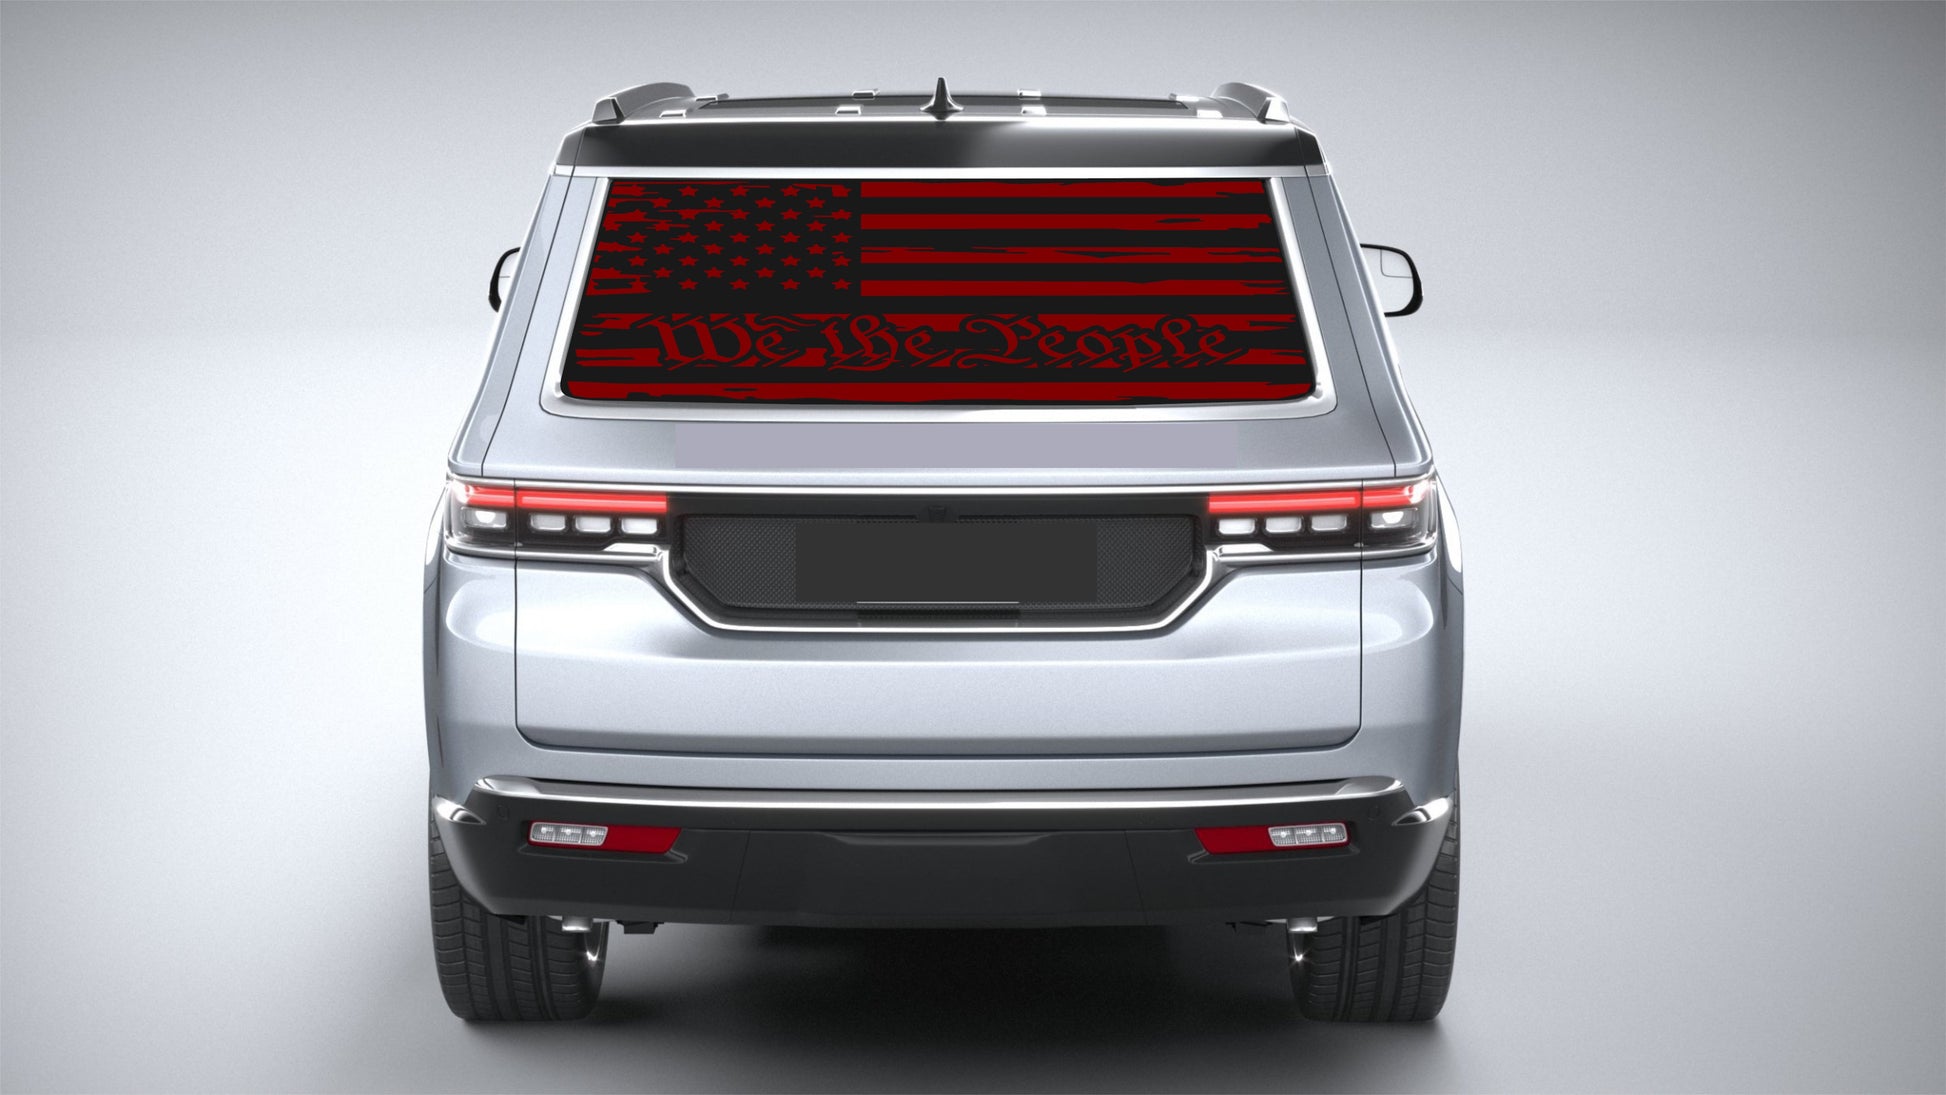 American Flag "We The People" Decal for Jeep Wagoneer Rear Window